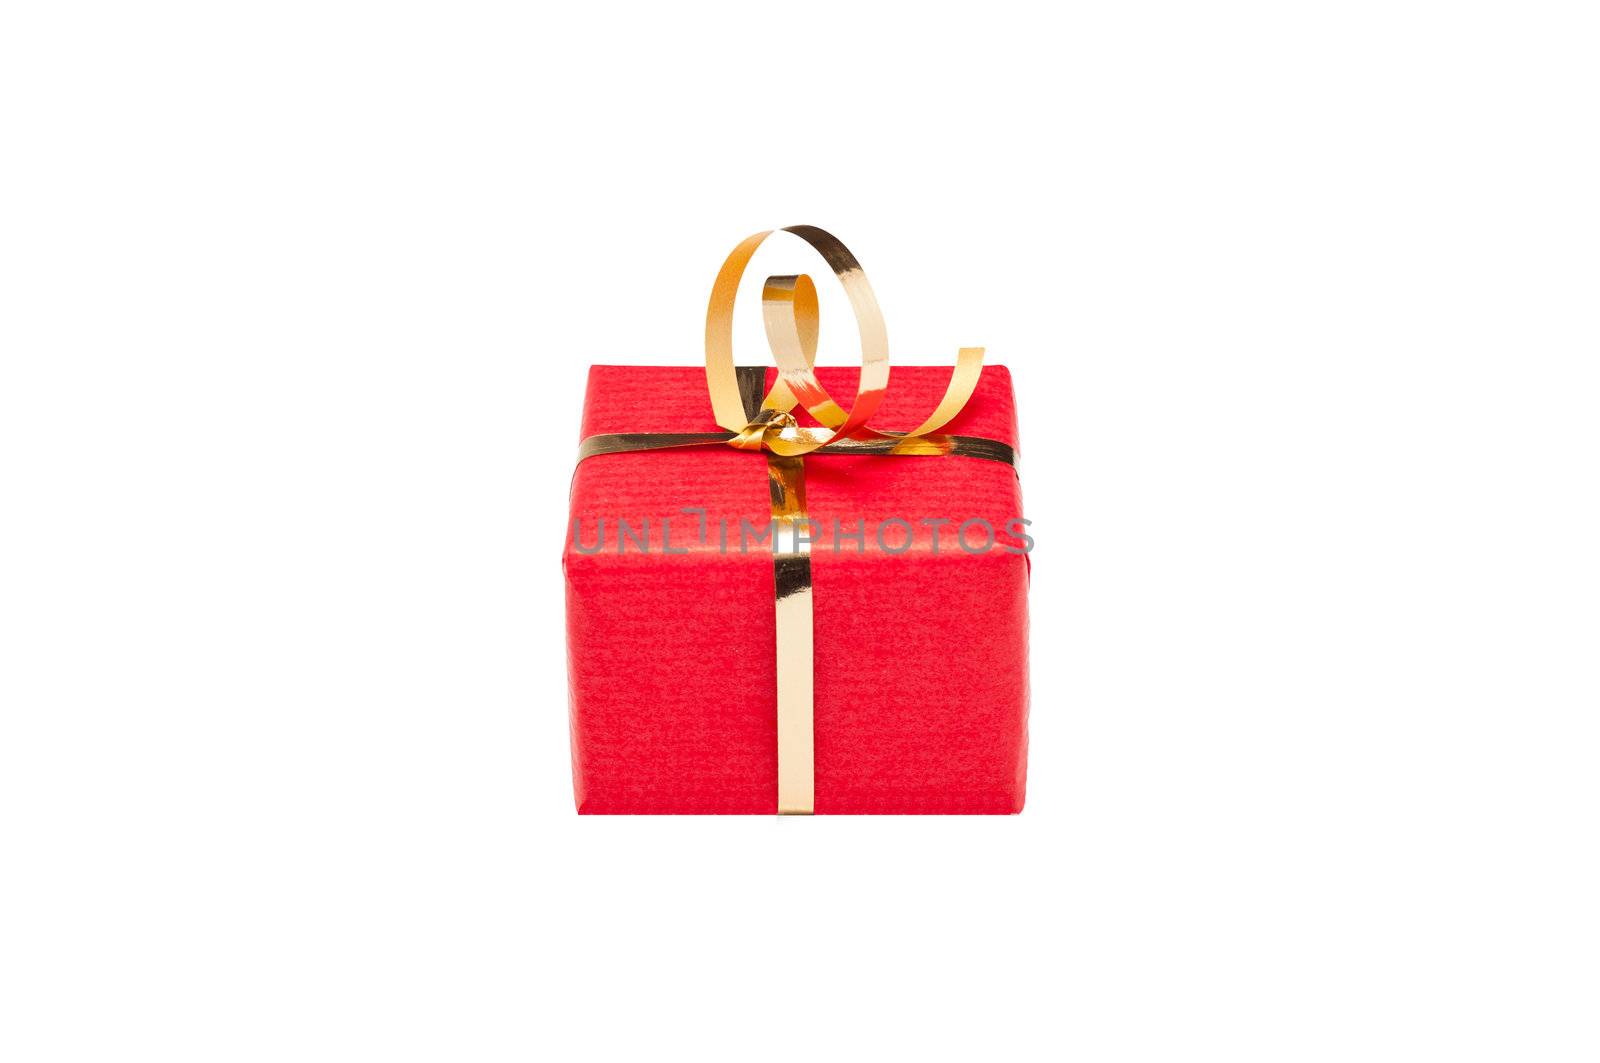 Red and Gold Xmas Gift Box by timh